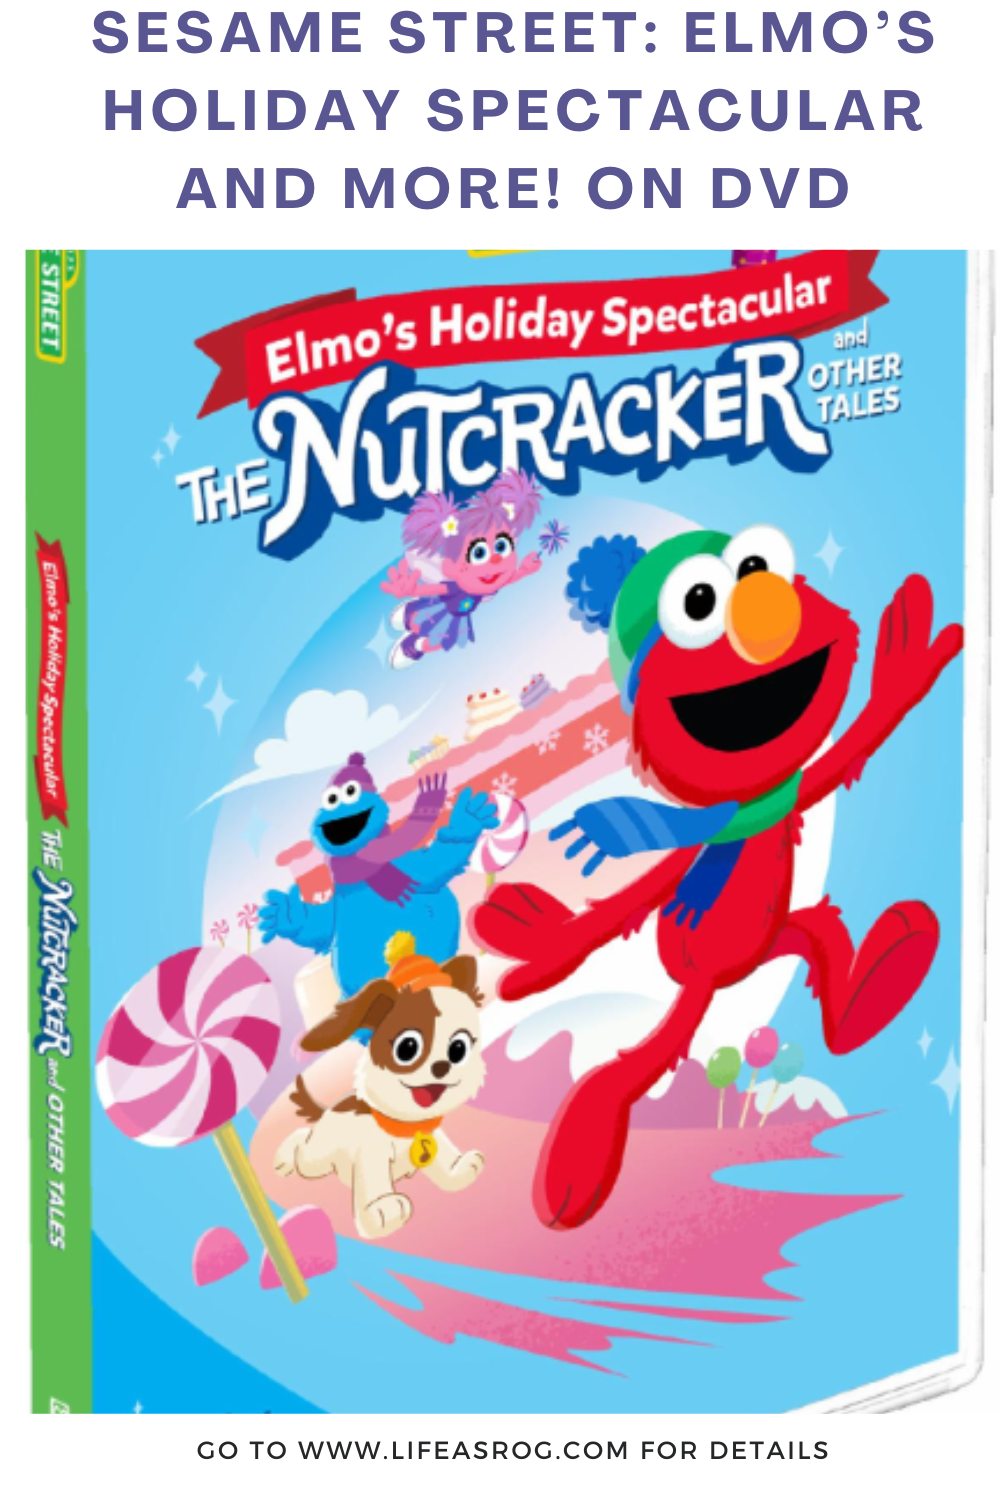 sesame street: elmo’s holiday spectacular and more! on dvd